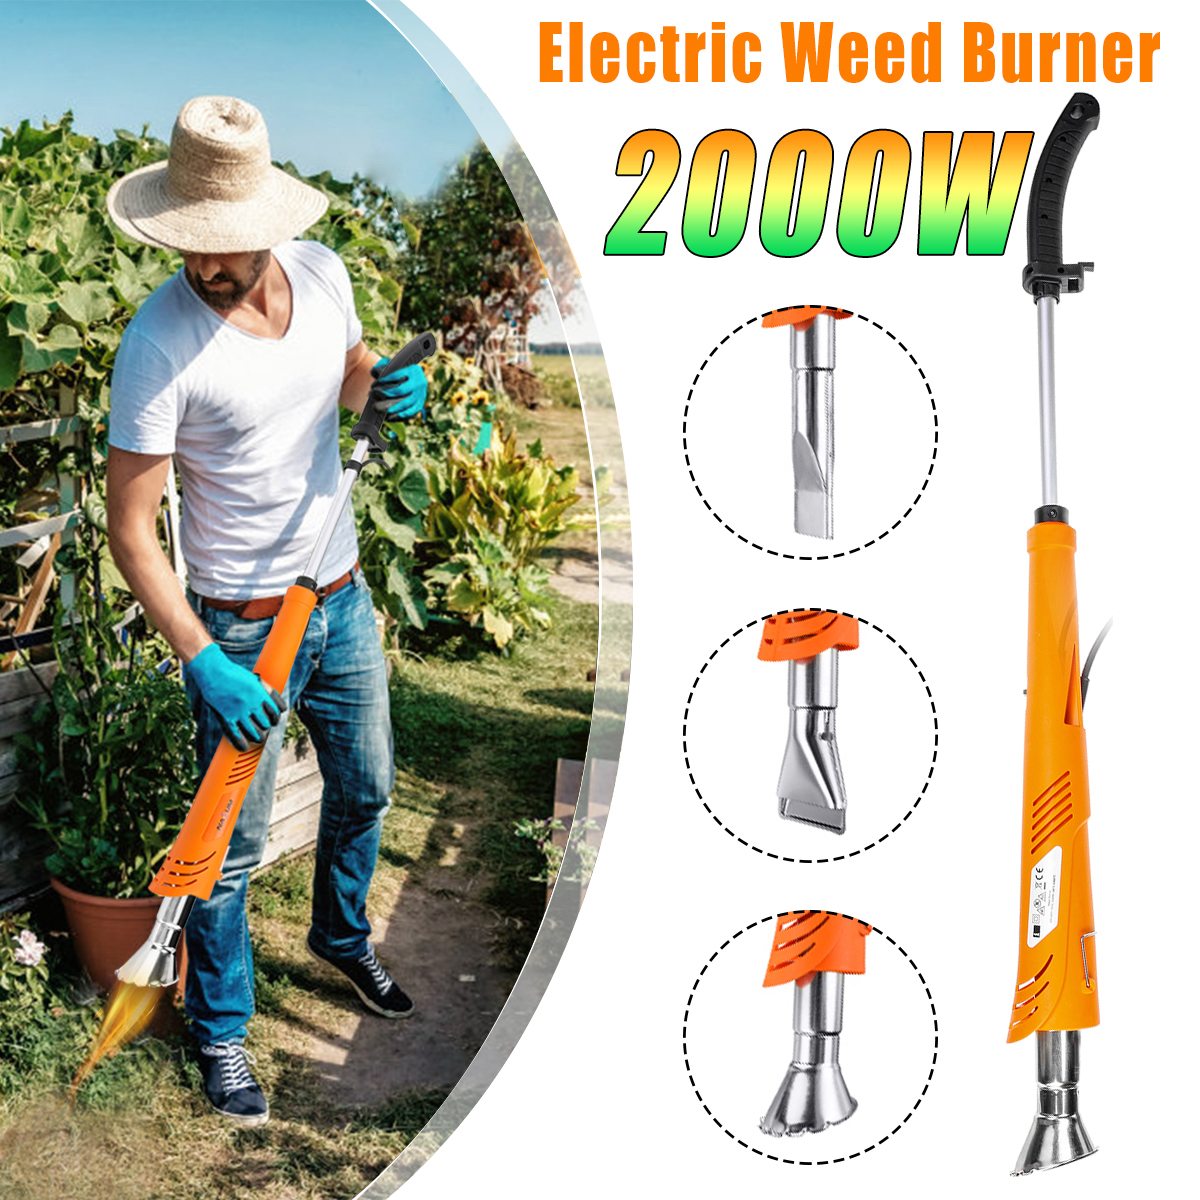 2000W-Electric-Weed-Burner-Detachable-Torch-Shape-Thermal-Trimmer-Hot-Air-Lawn-Killer-1753599-1